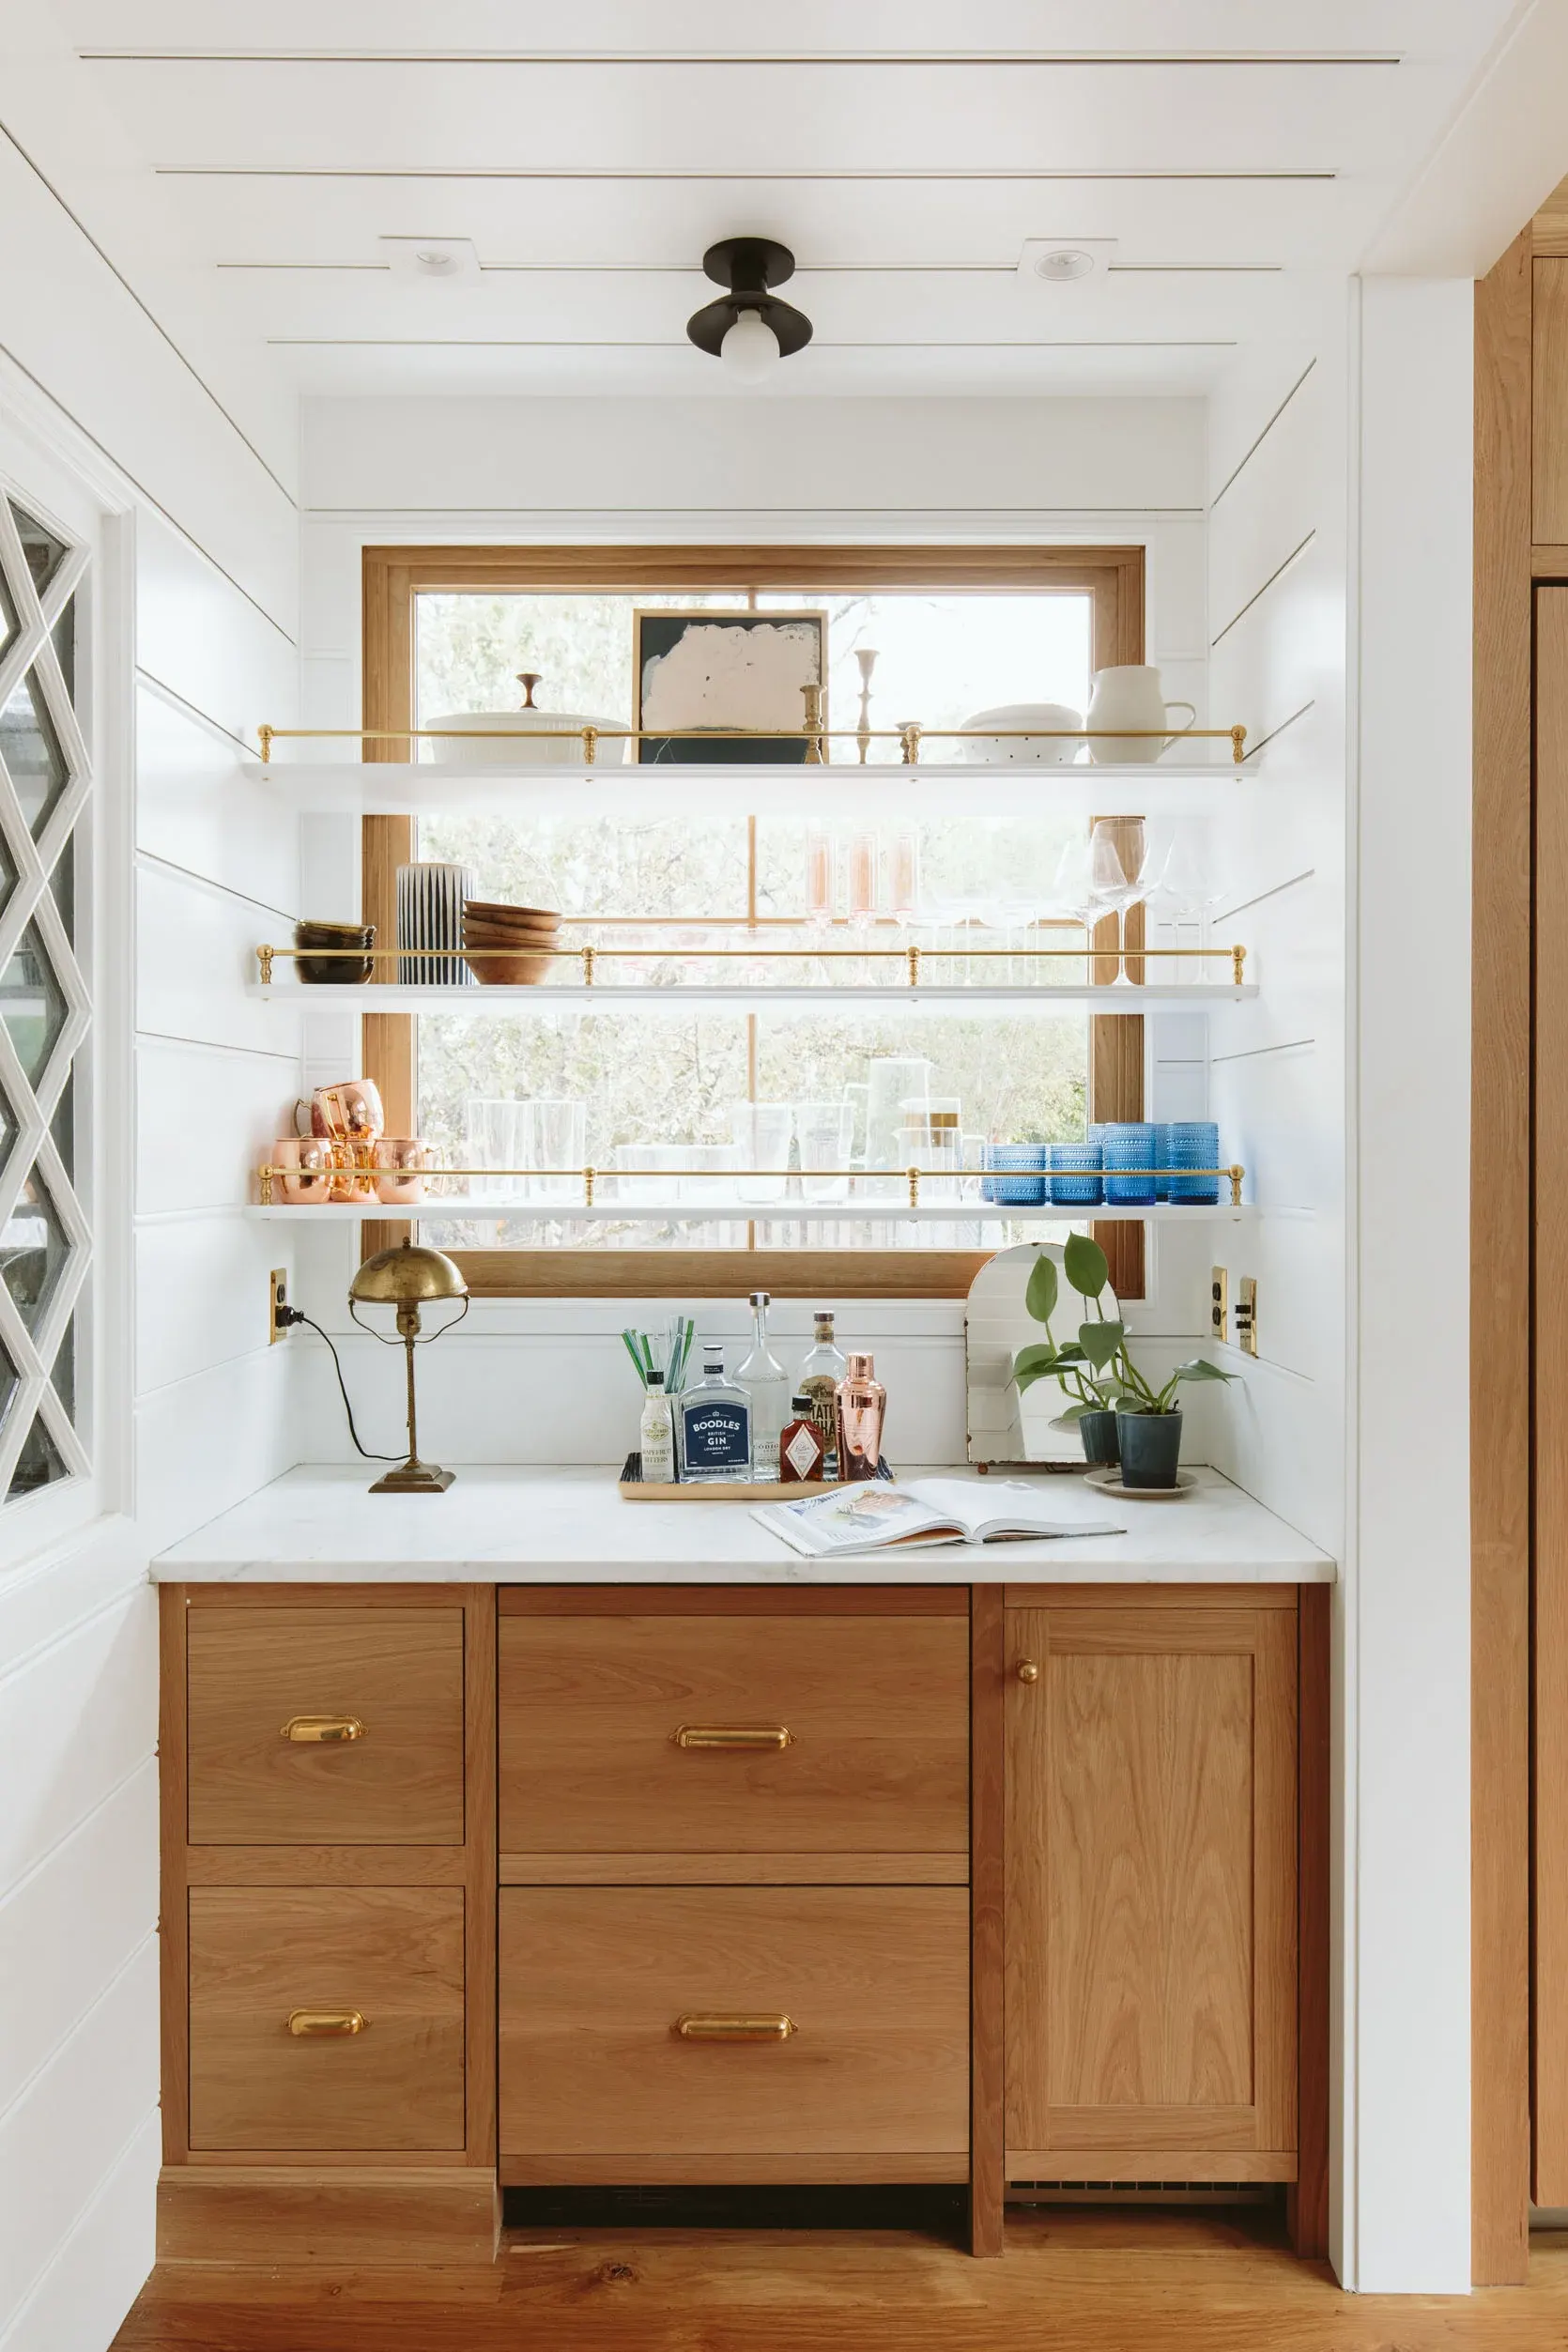 DIY: HOW TO BUILD SHELVES WITH BRASS GALLERY RAILS